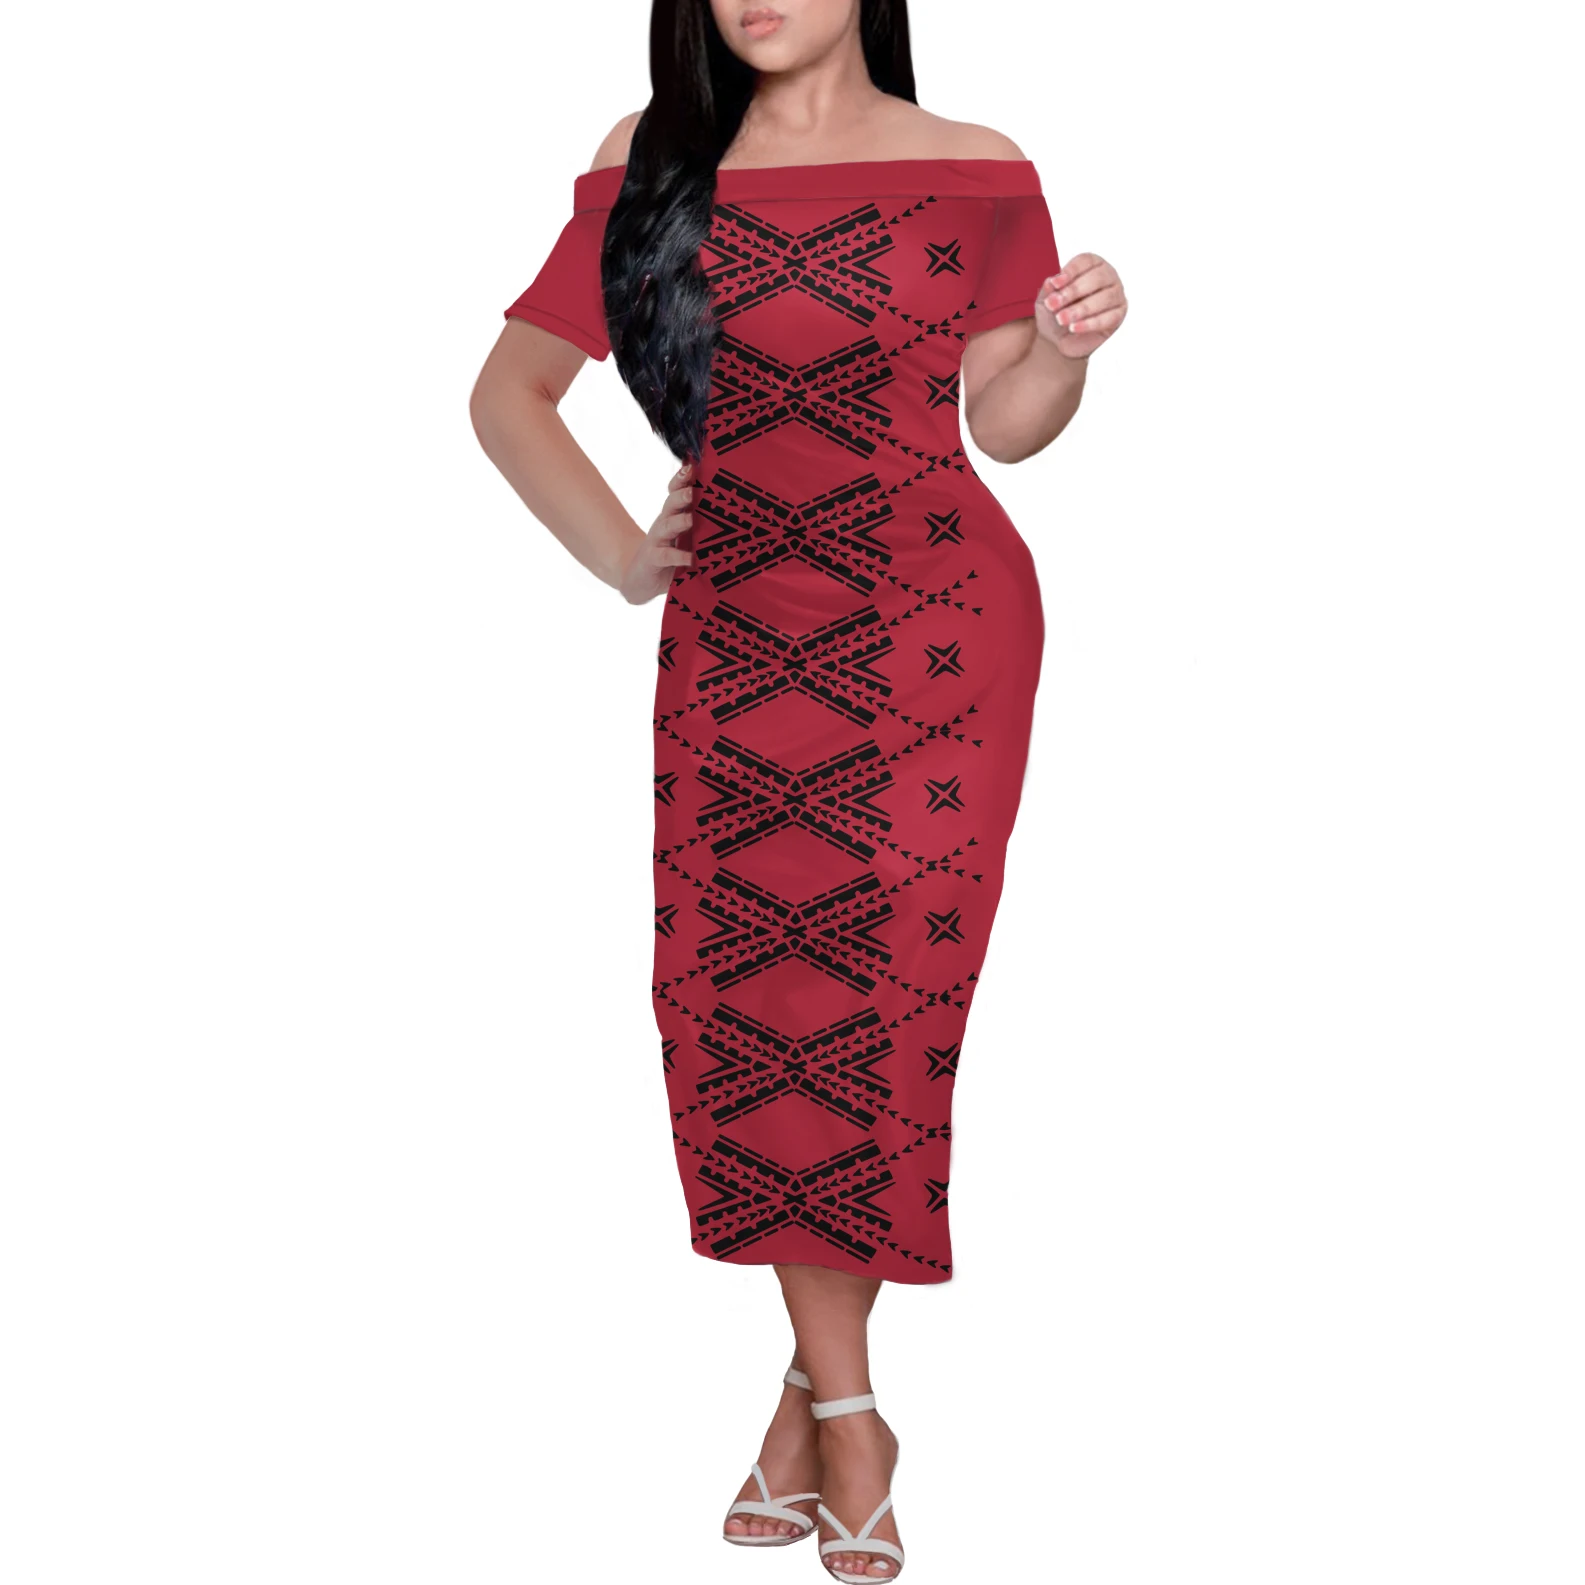 

Polynesian Tribal 170 GSM POLYESTERE/ Spandex Knitwear Women's Dress Dress with bare sleeves and body